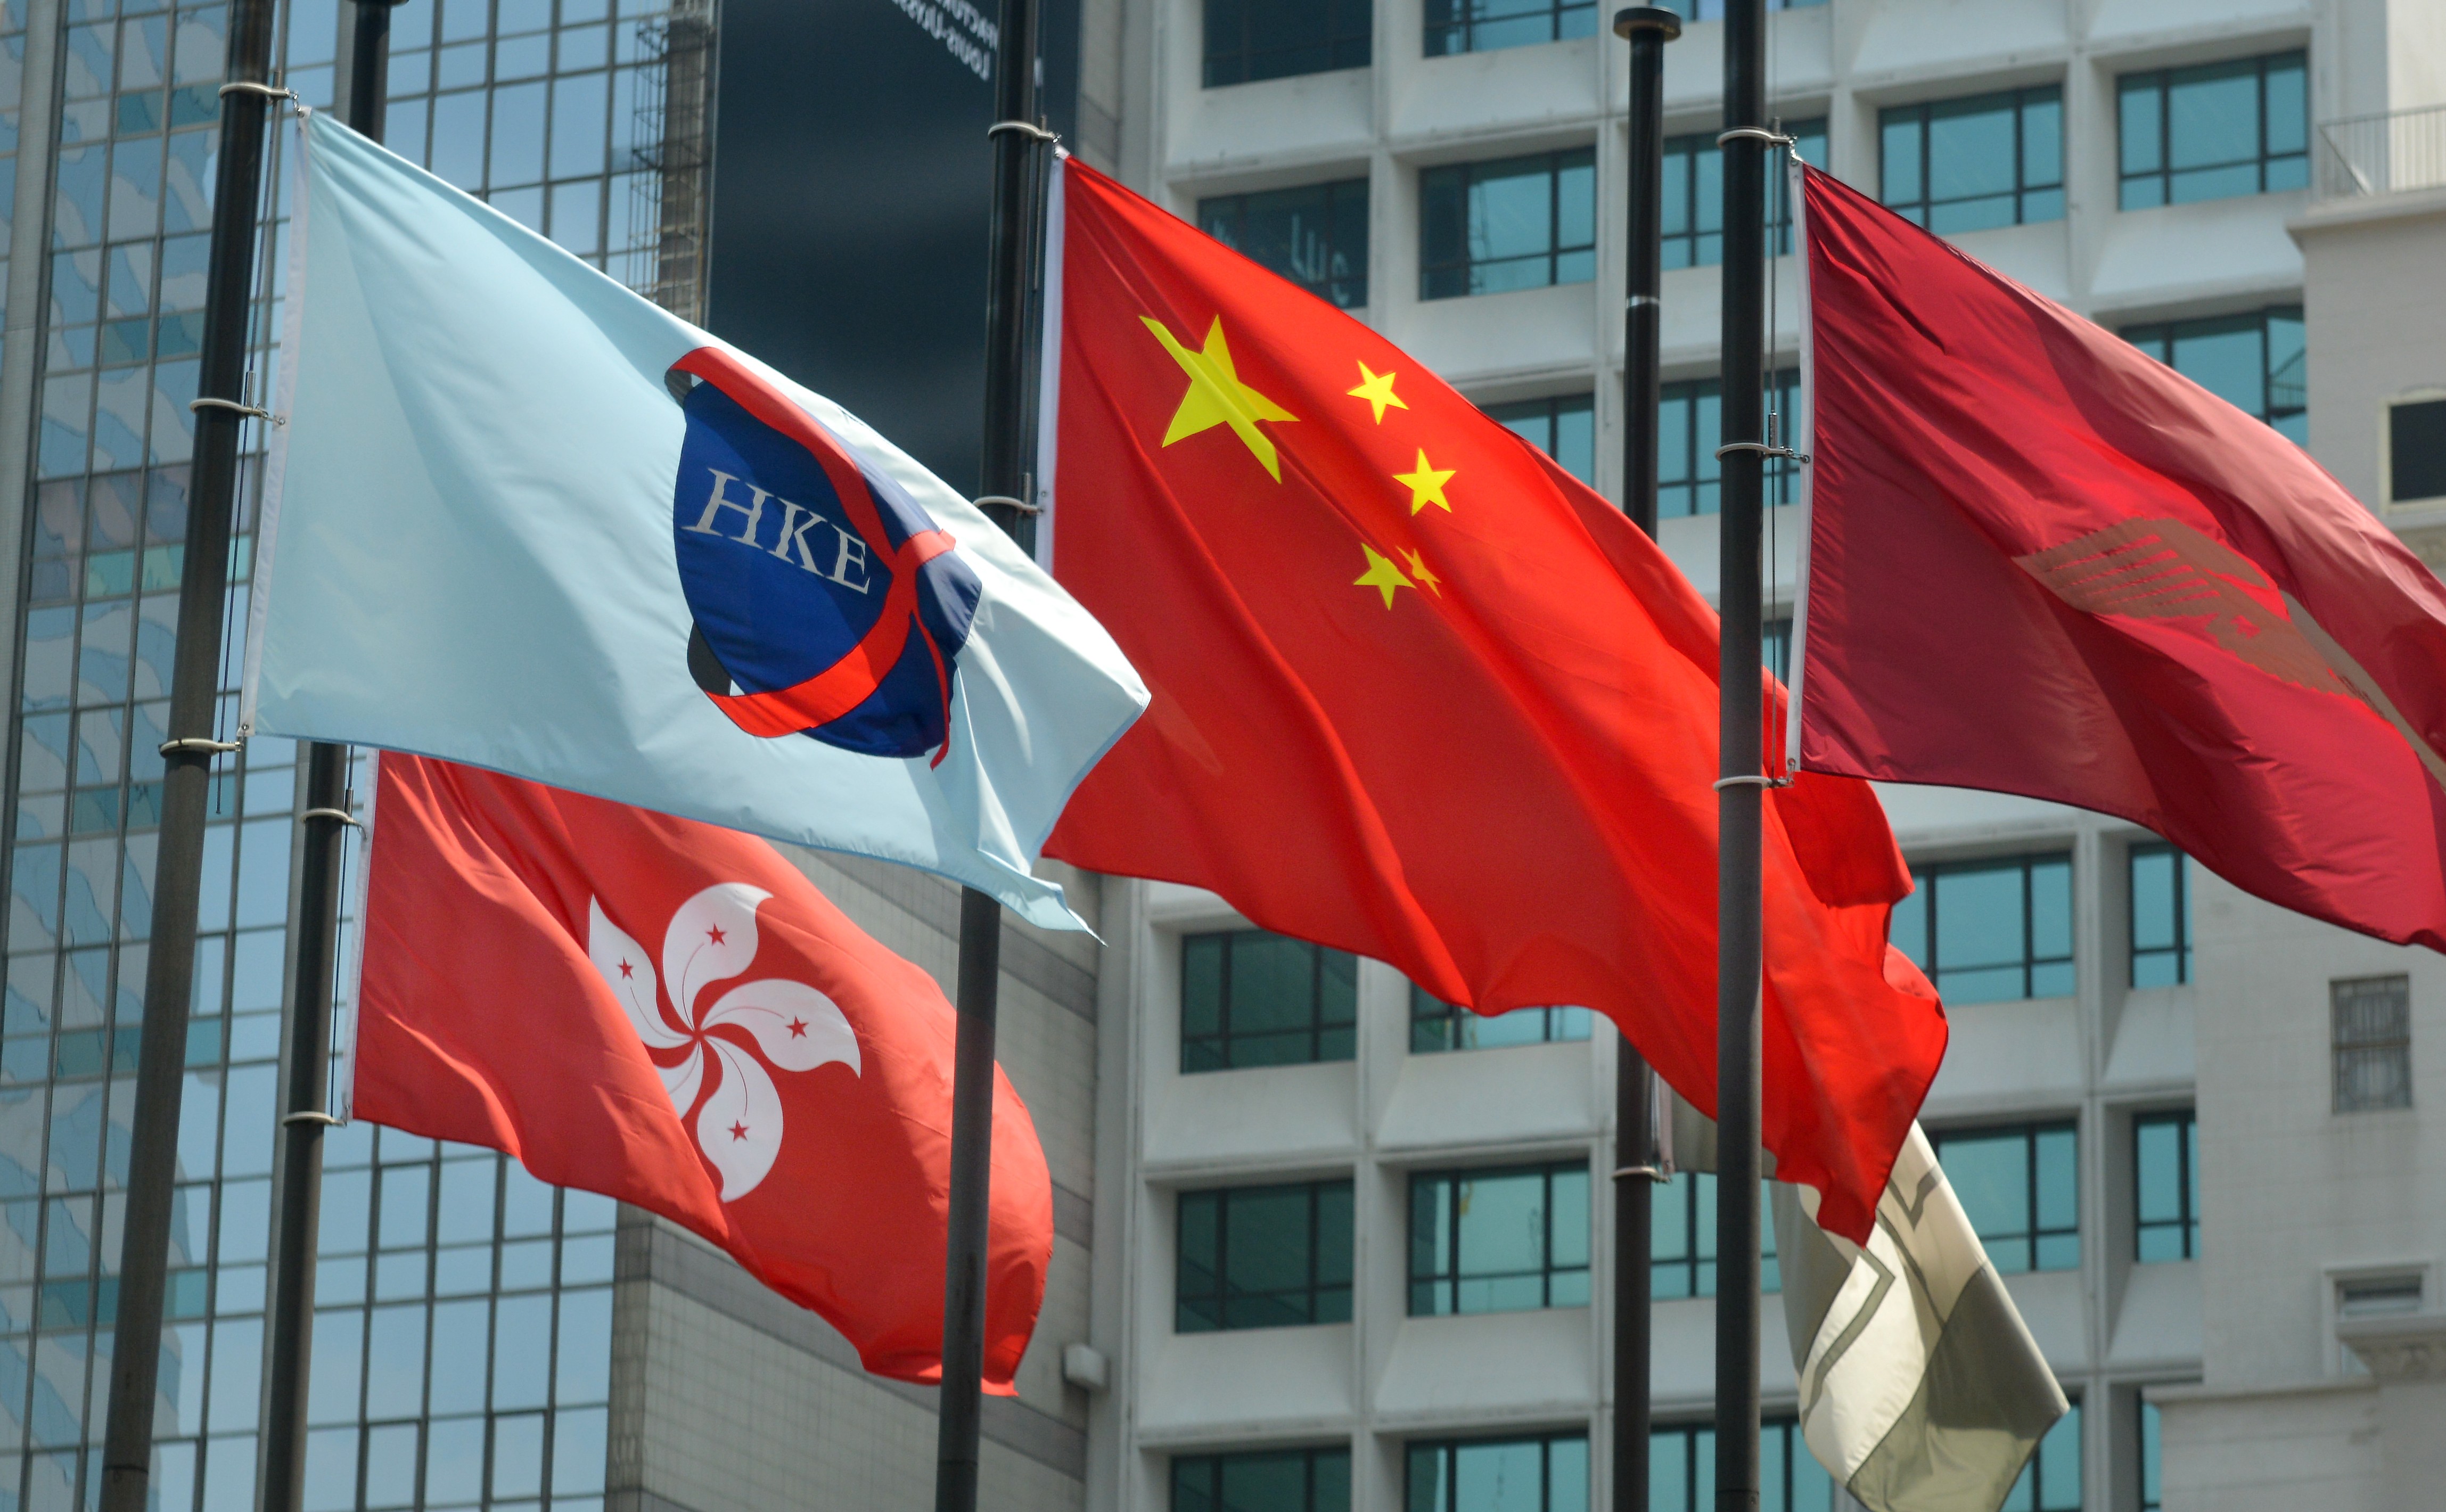 A flag of Hong Kong Exchanges and Clearing Limited (HKEx) flying at Exchange Square. Photo: SCMP